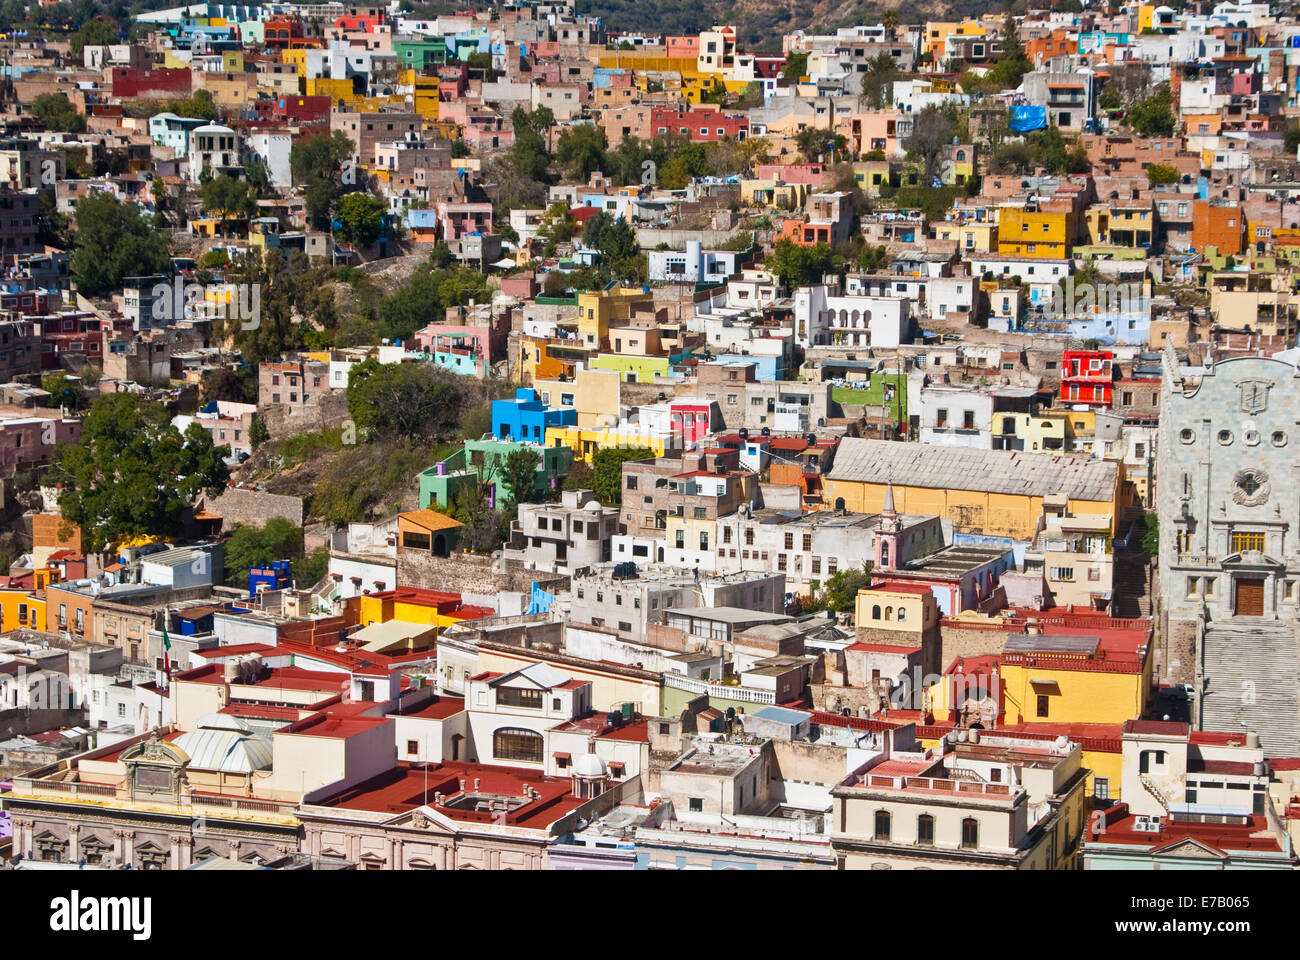 GUANAJUATO, MEXICO - Guanajuato World Heritage Site, historic city view of 16th century buildings and houses of vivid colors Stock Photo